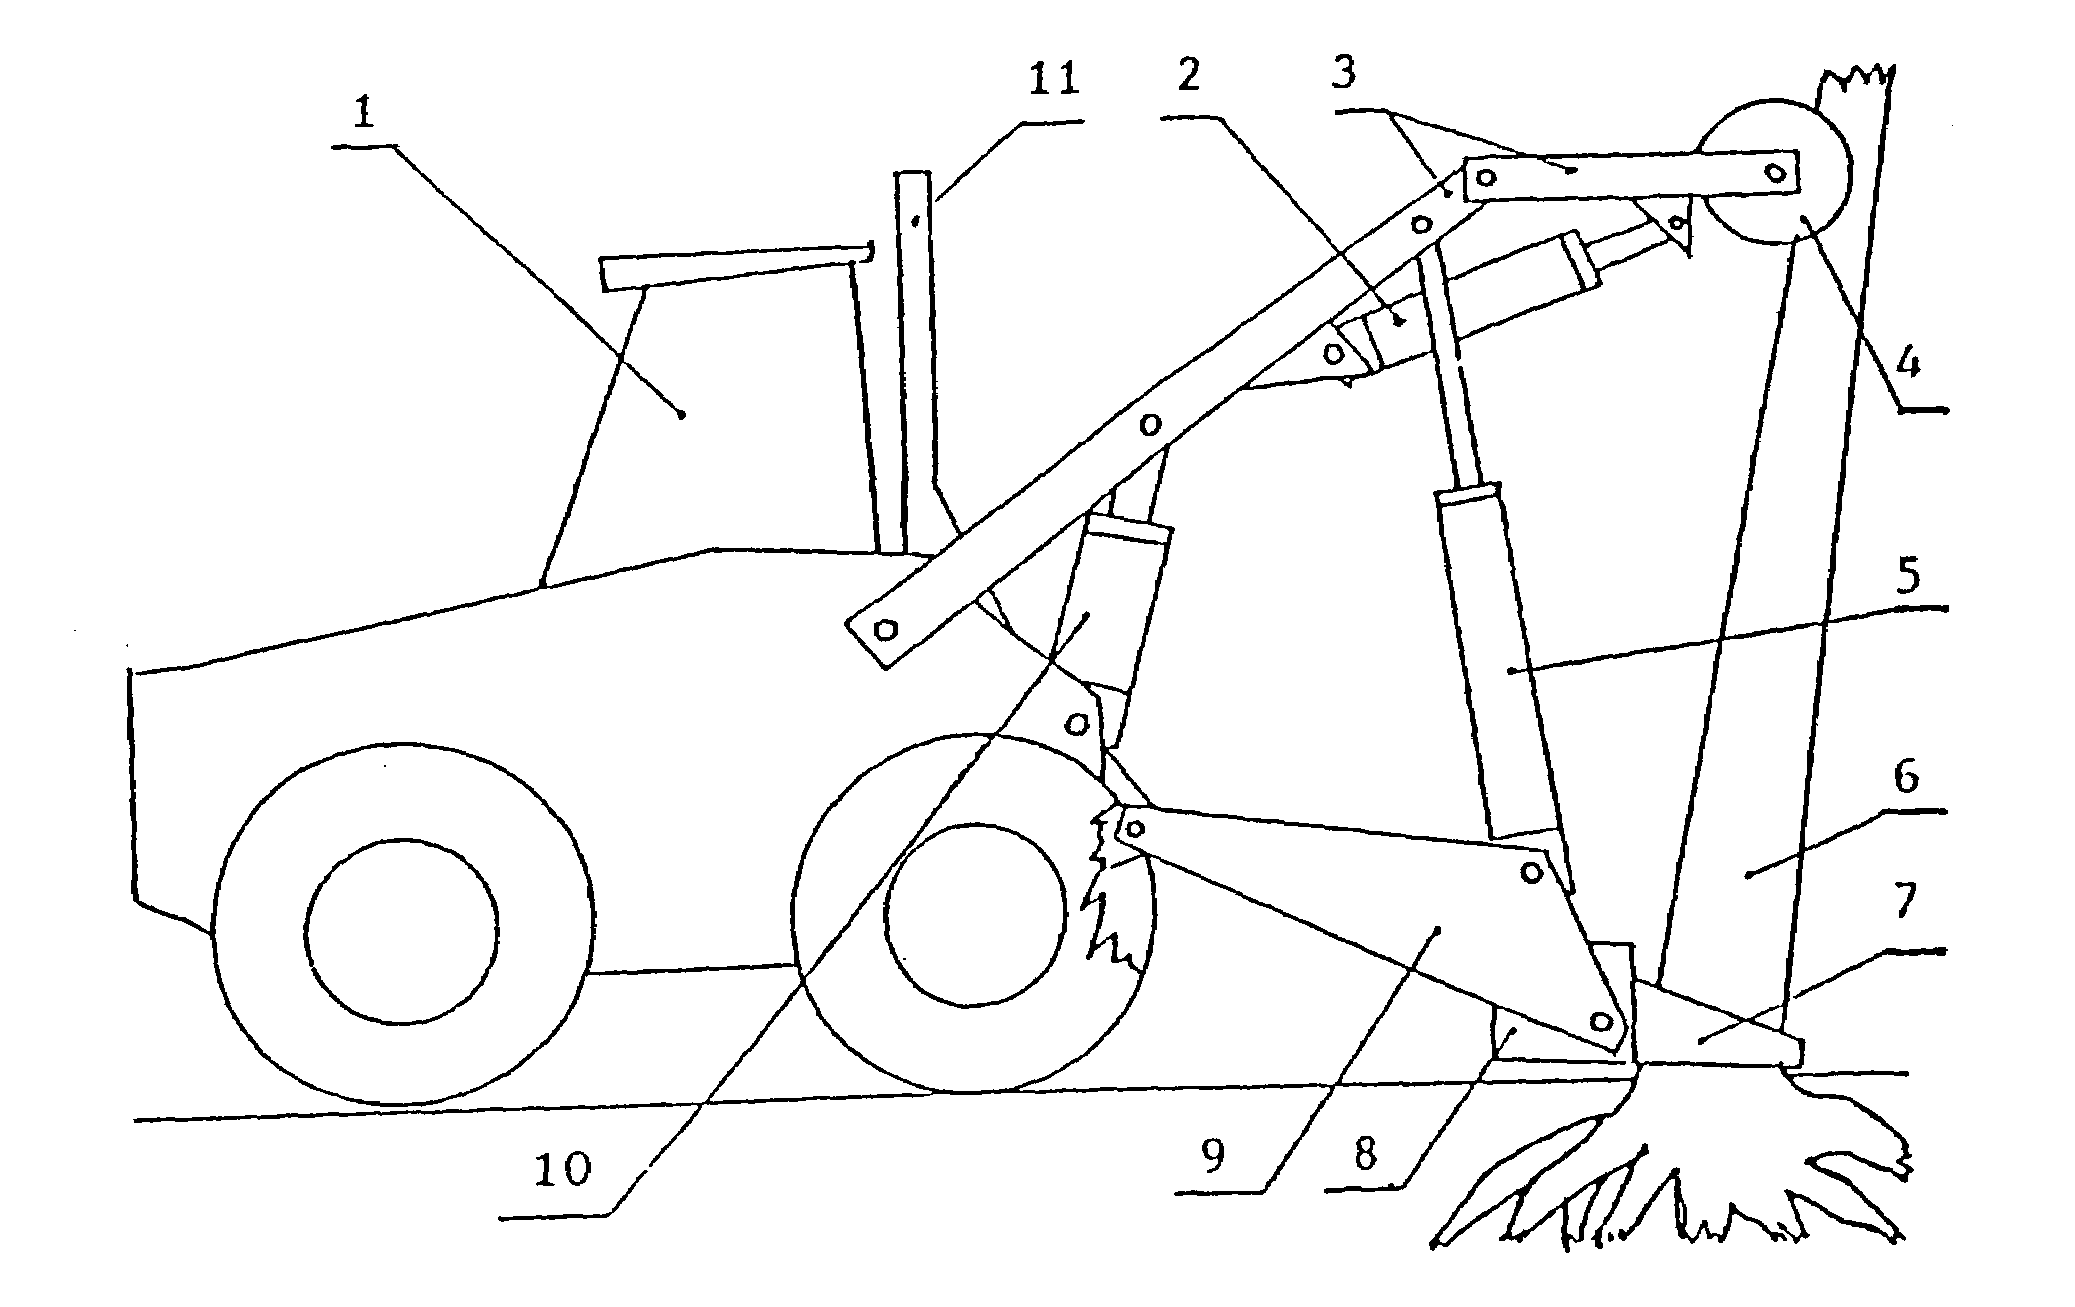 Process and apparatus for uprooting trees